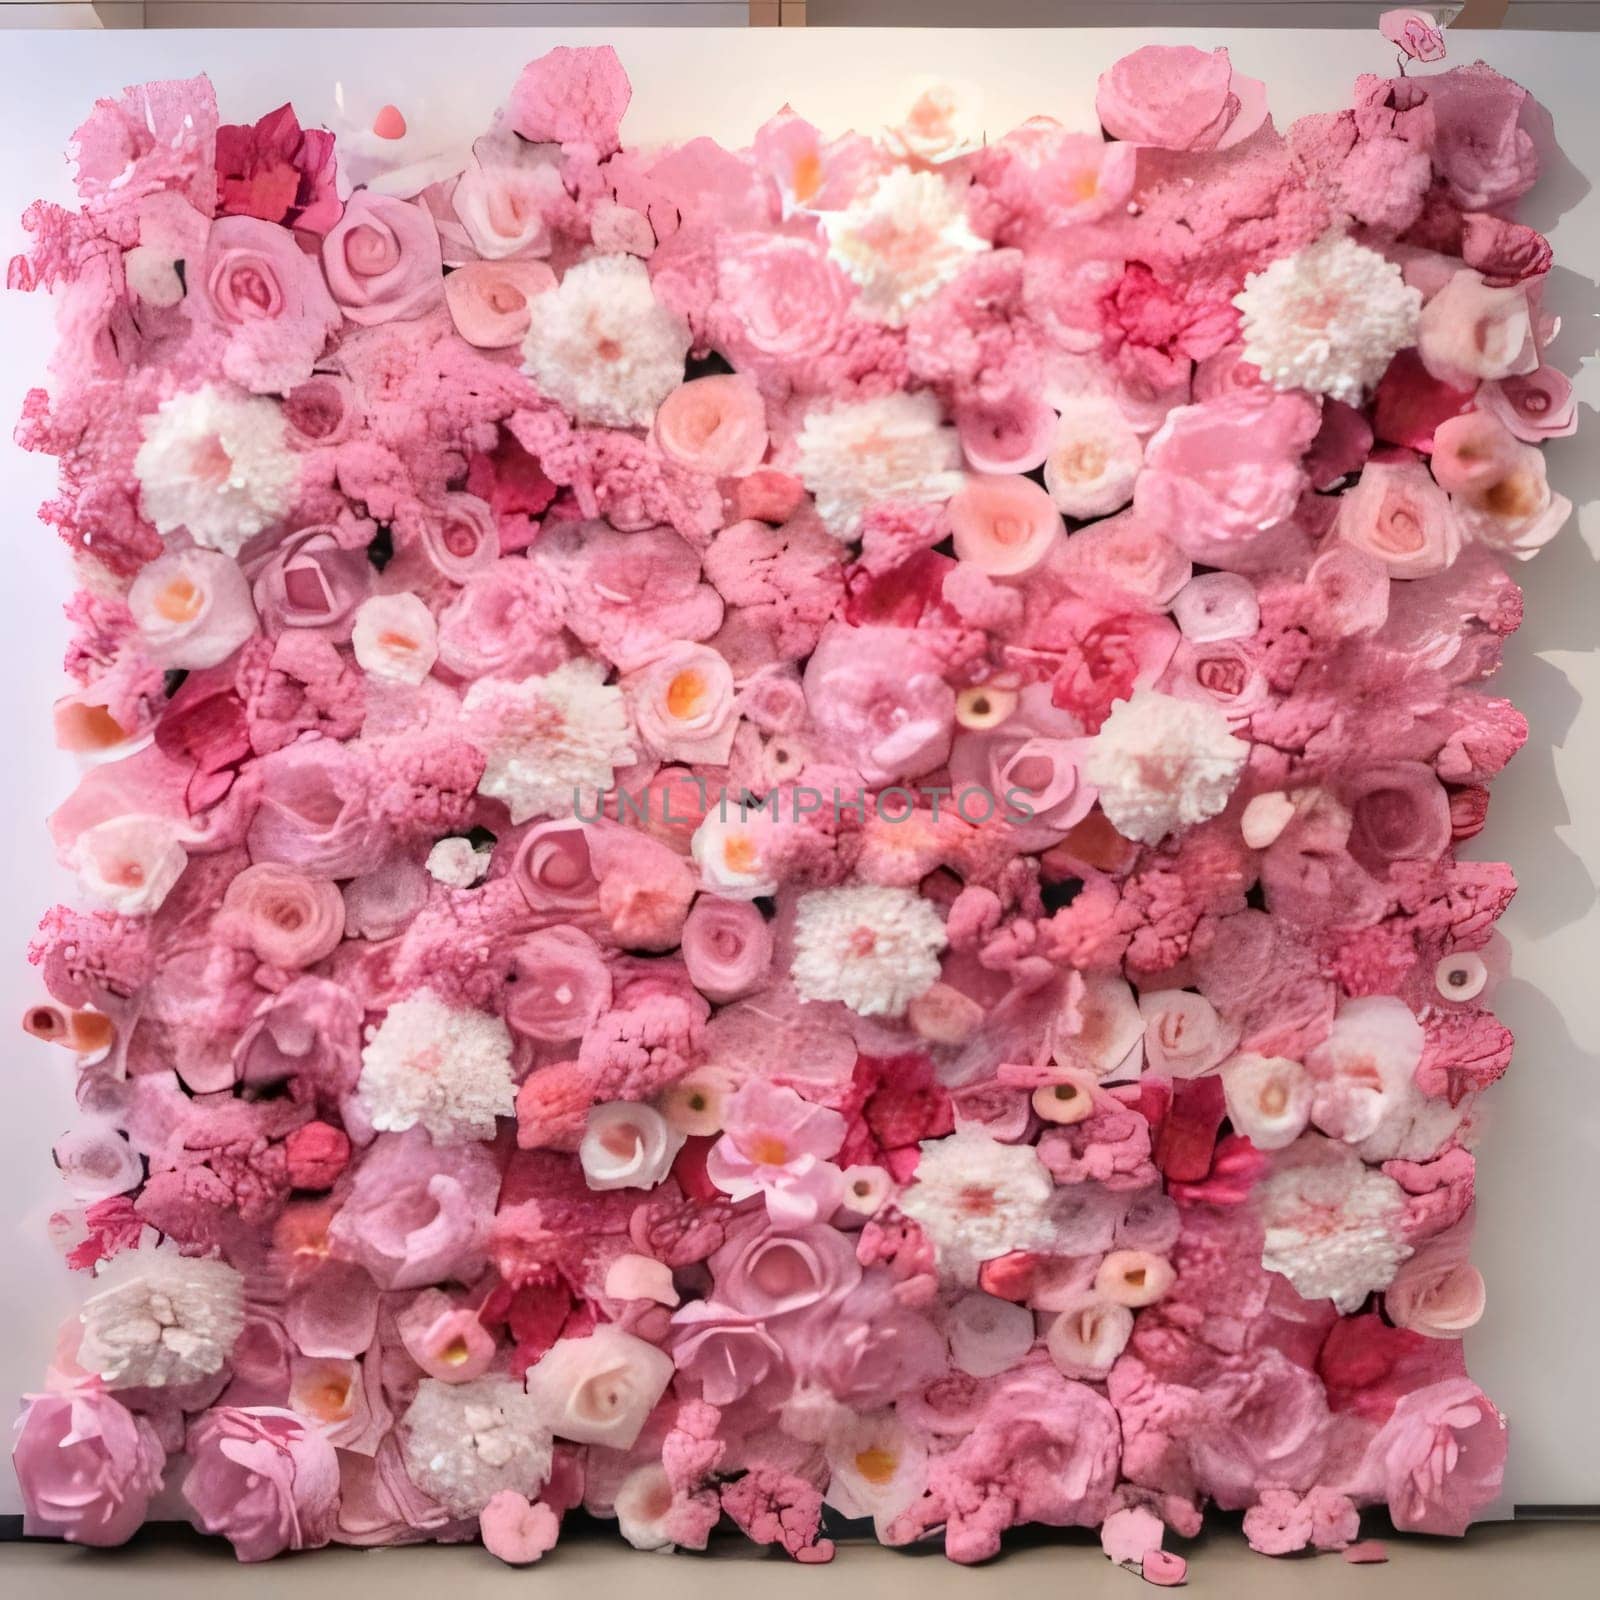 Decorated wall of white, pink and red flower petals, roses. Flowering flowers, a symbol of spring, new life. by ThemesS